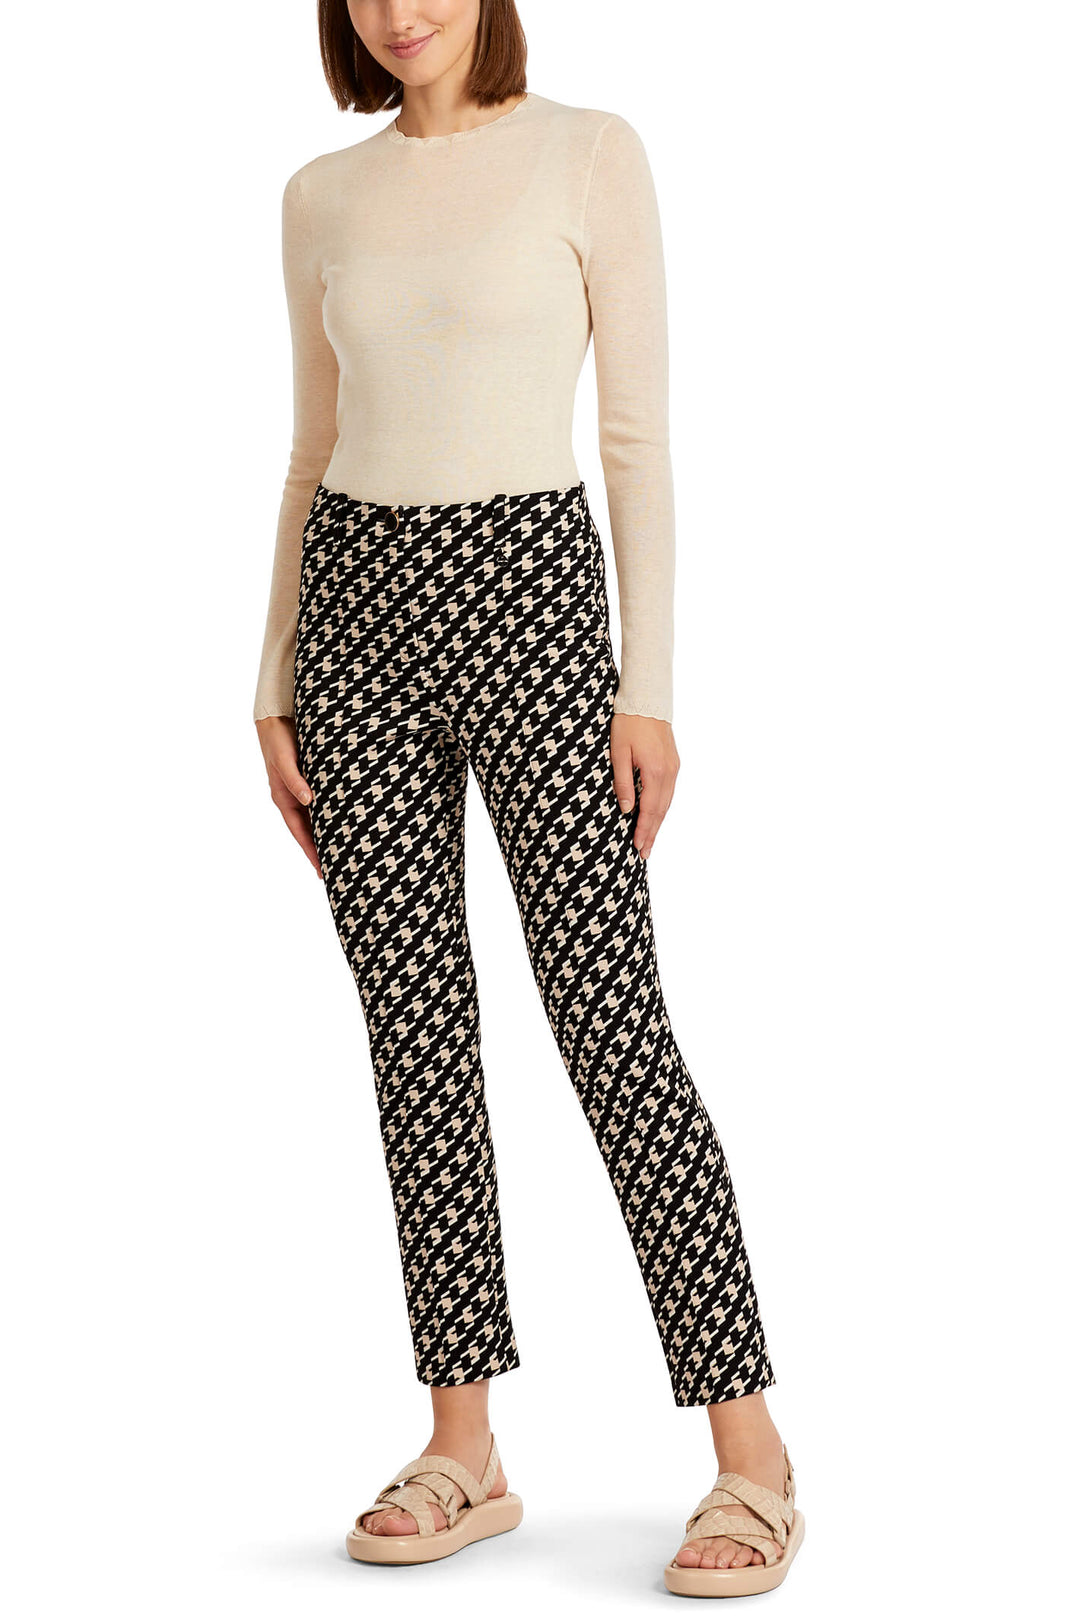 Marc Cain Collection UC 81.11 J11 Black Print Stretch Trousers - Olivia Grace Fashion